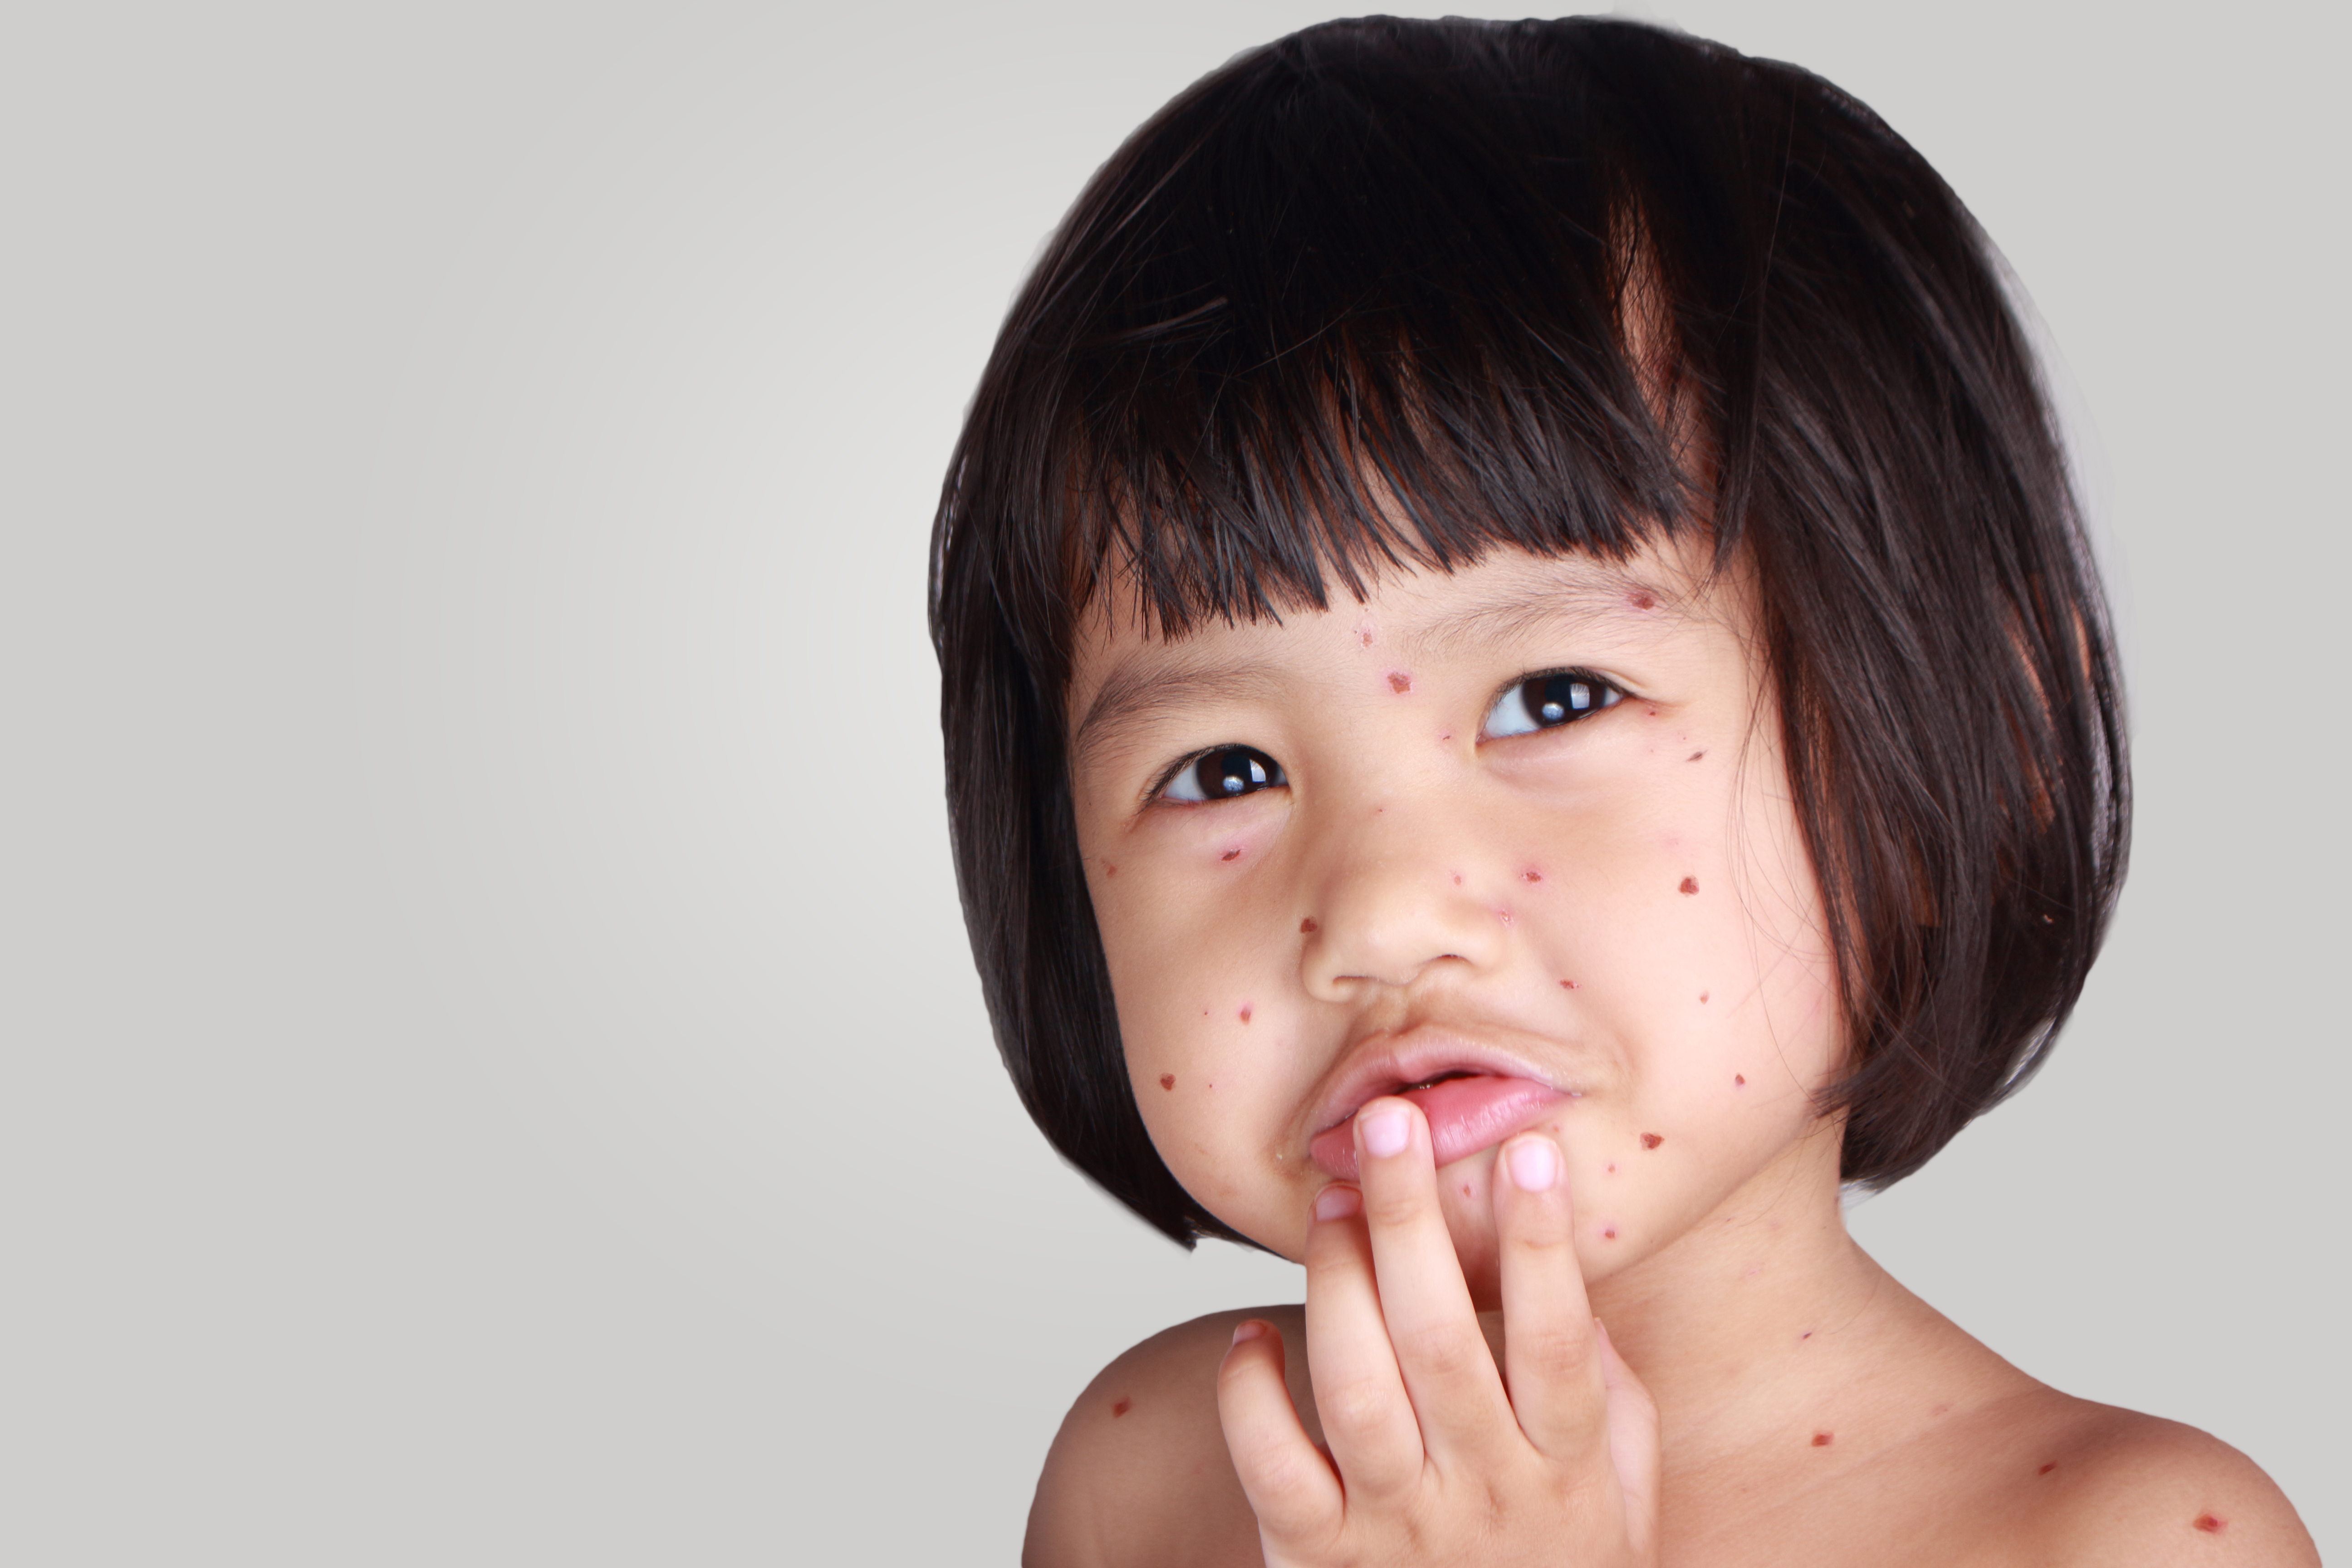 image of a child with chickenpox